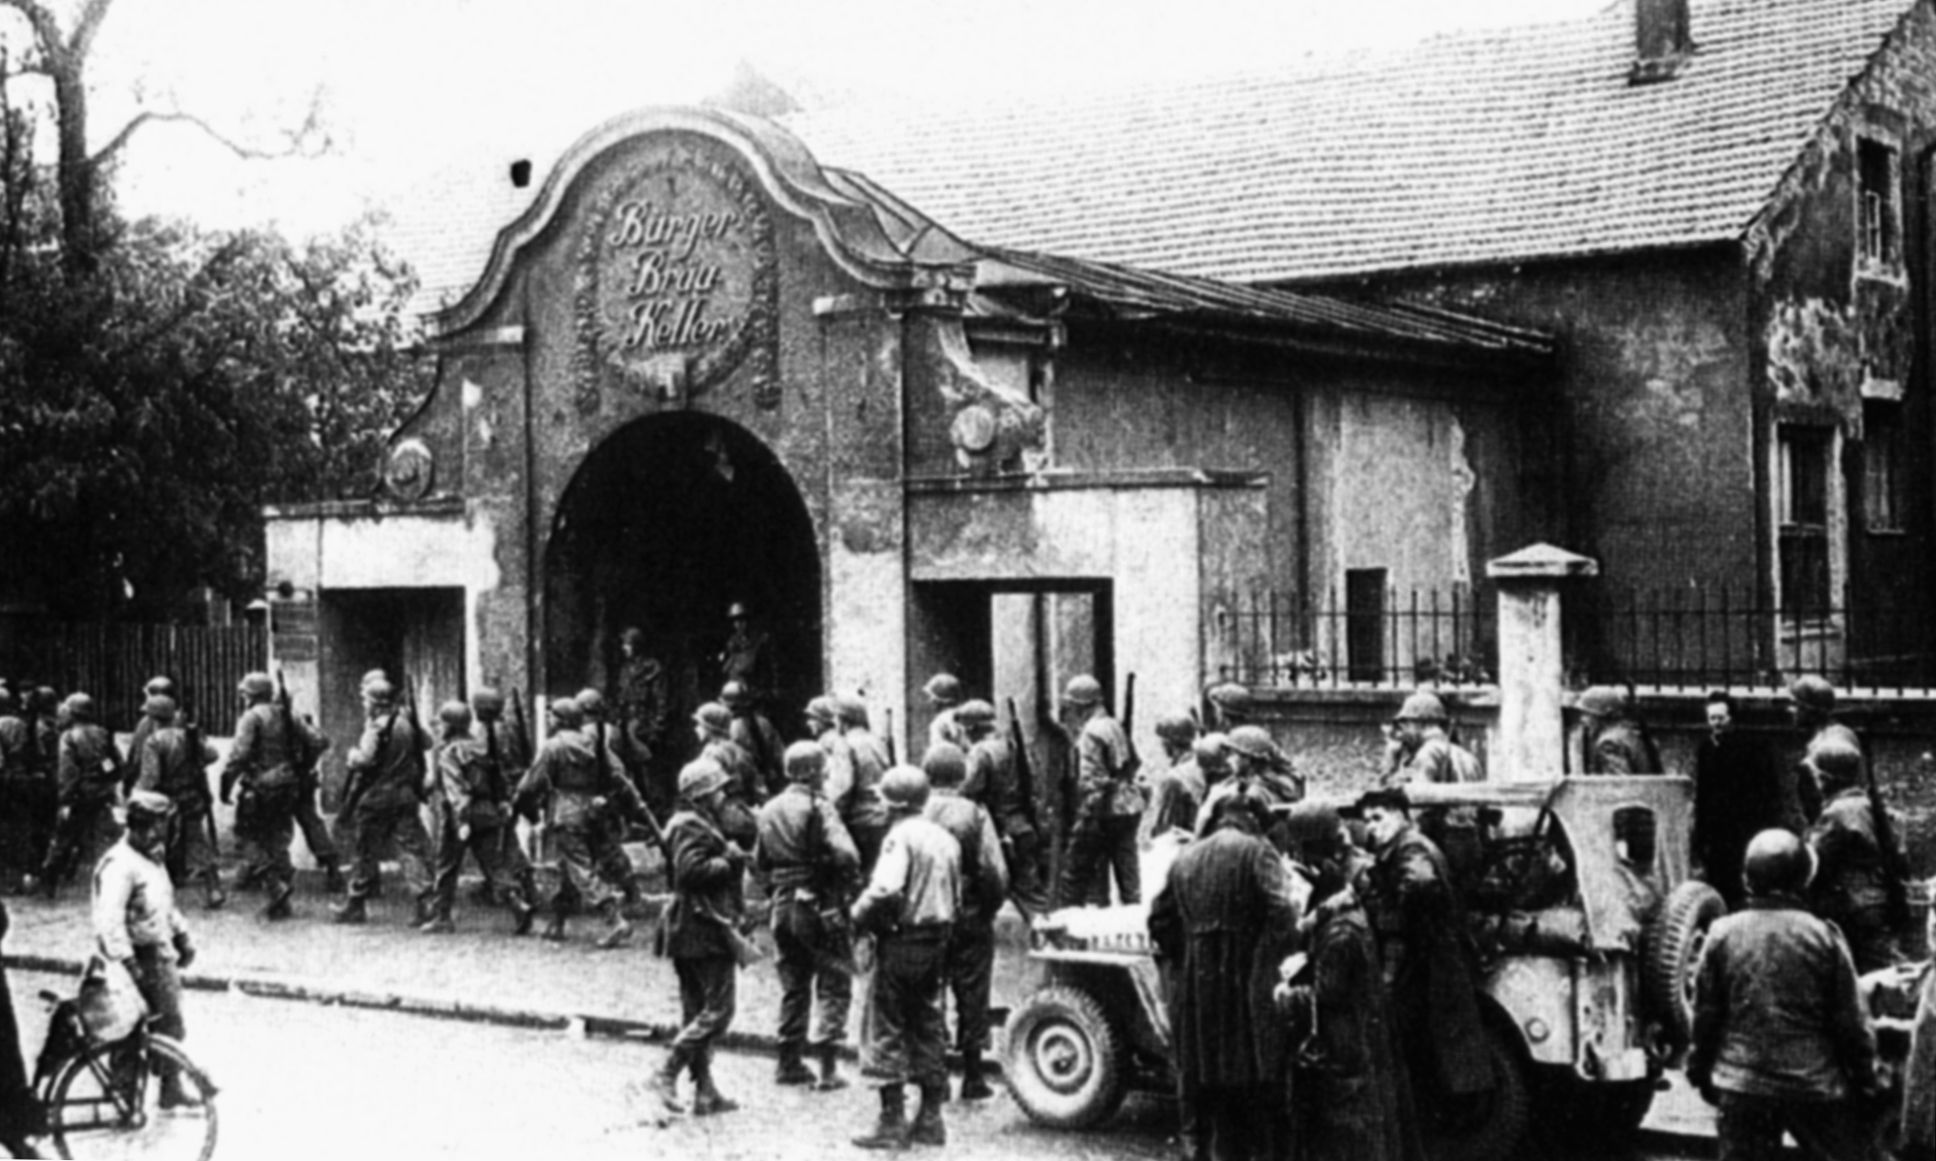 American GIs outside the main entrance to the Burgerbraukeller in April 1945. The beer hall was later replaced by a hotel.